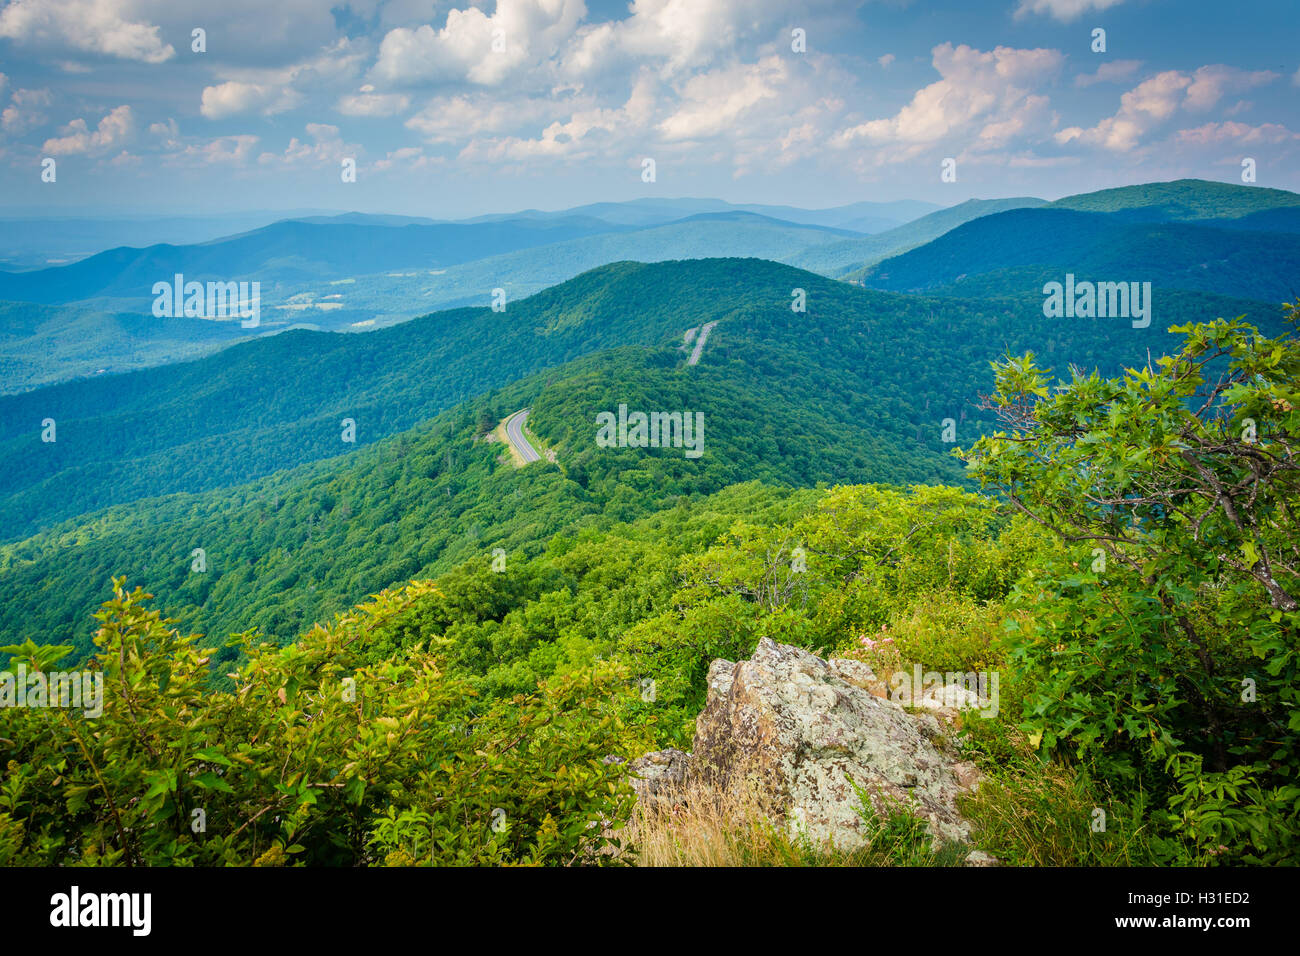 View of the Blue Ridge Mountains from Little Stony Man Cliffs, in Shenandoah National Park, Virginia. Stock Photo